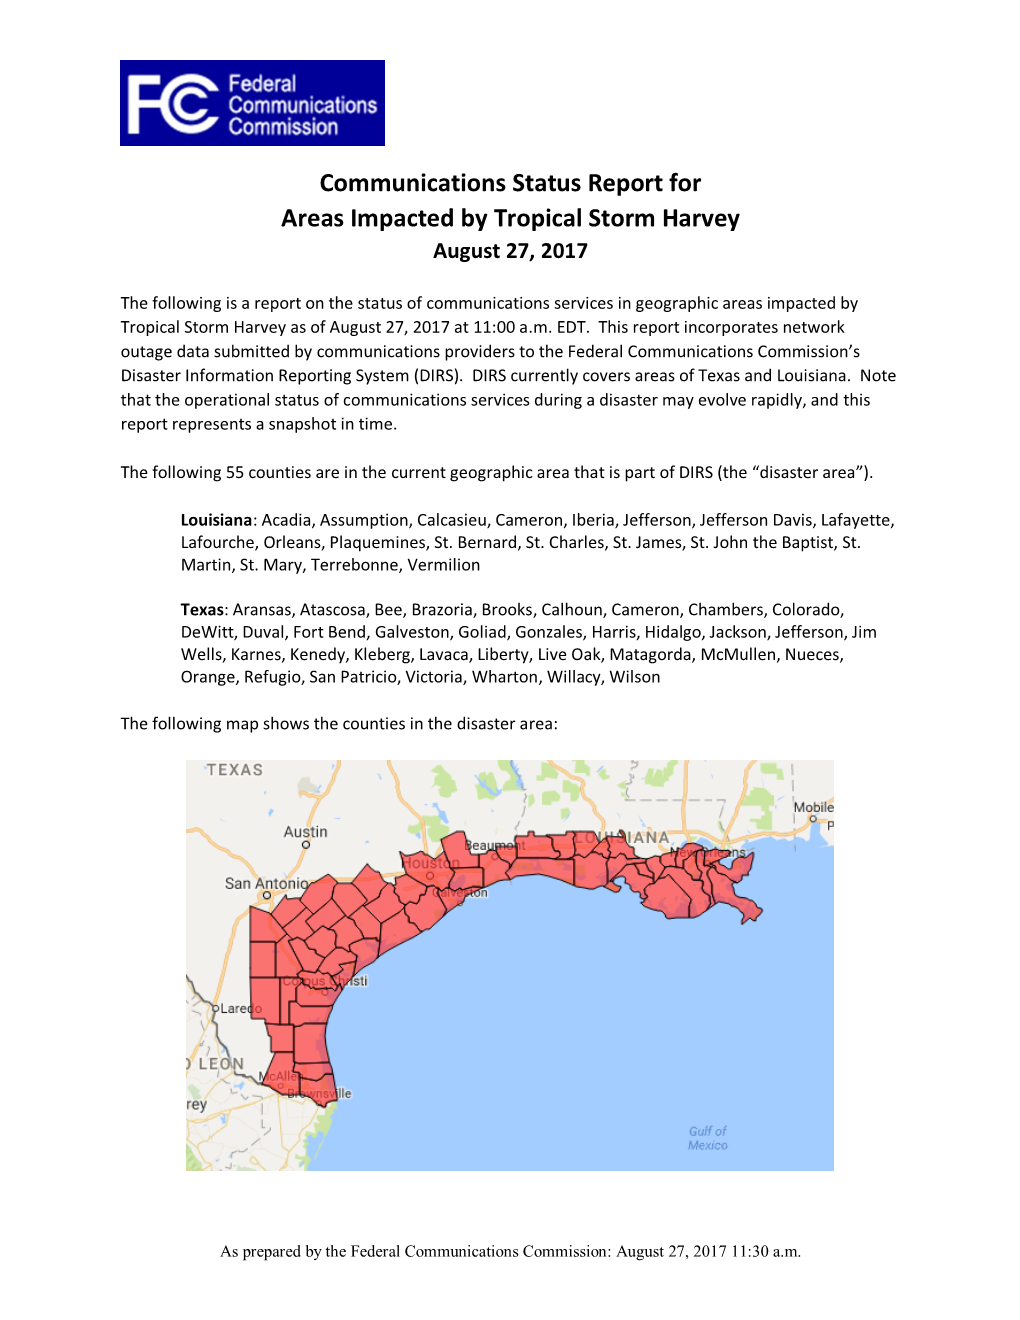 Communications Status Report for Areas Impacted by Tropical Storm Harvey August 27, 2017